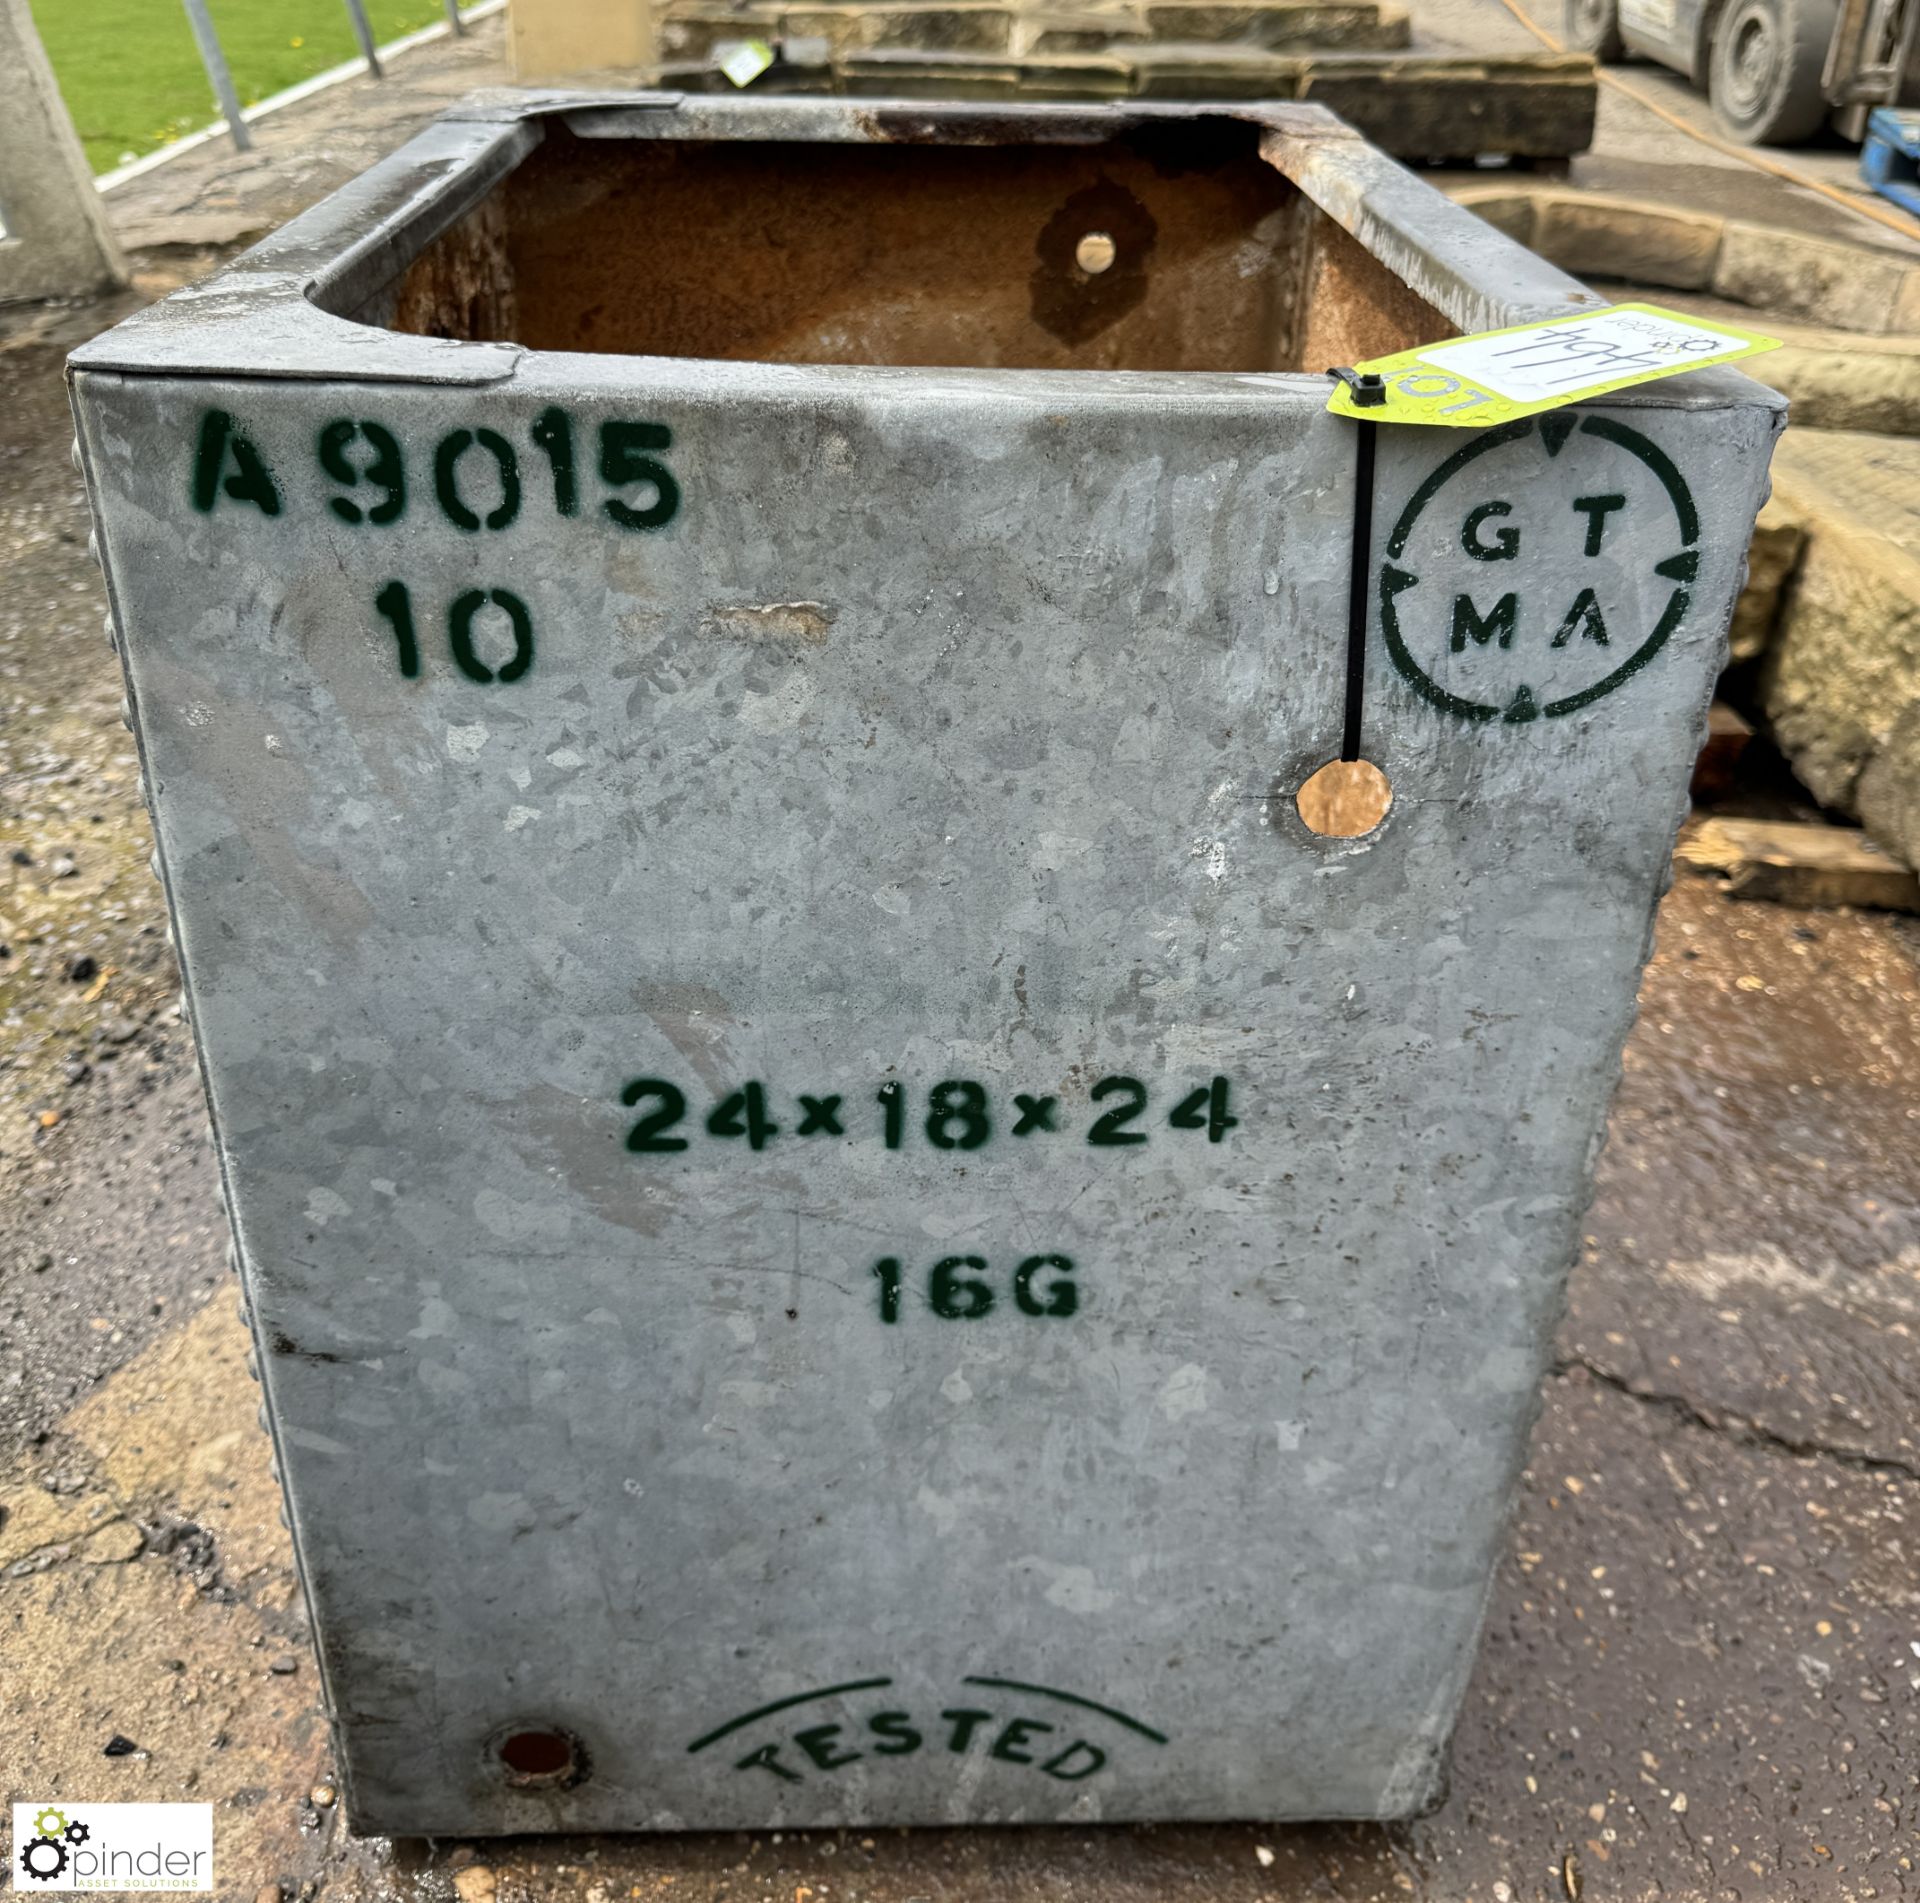 A metal galvanised riveted Water Cistern, approx. 24in x 24in x 18in, circa 1920 to 1940s - Image 5 of 6